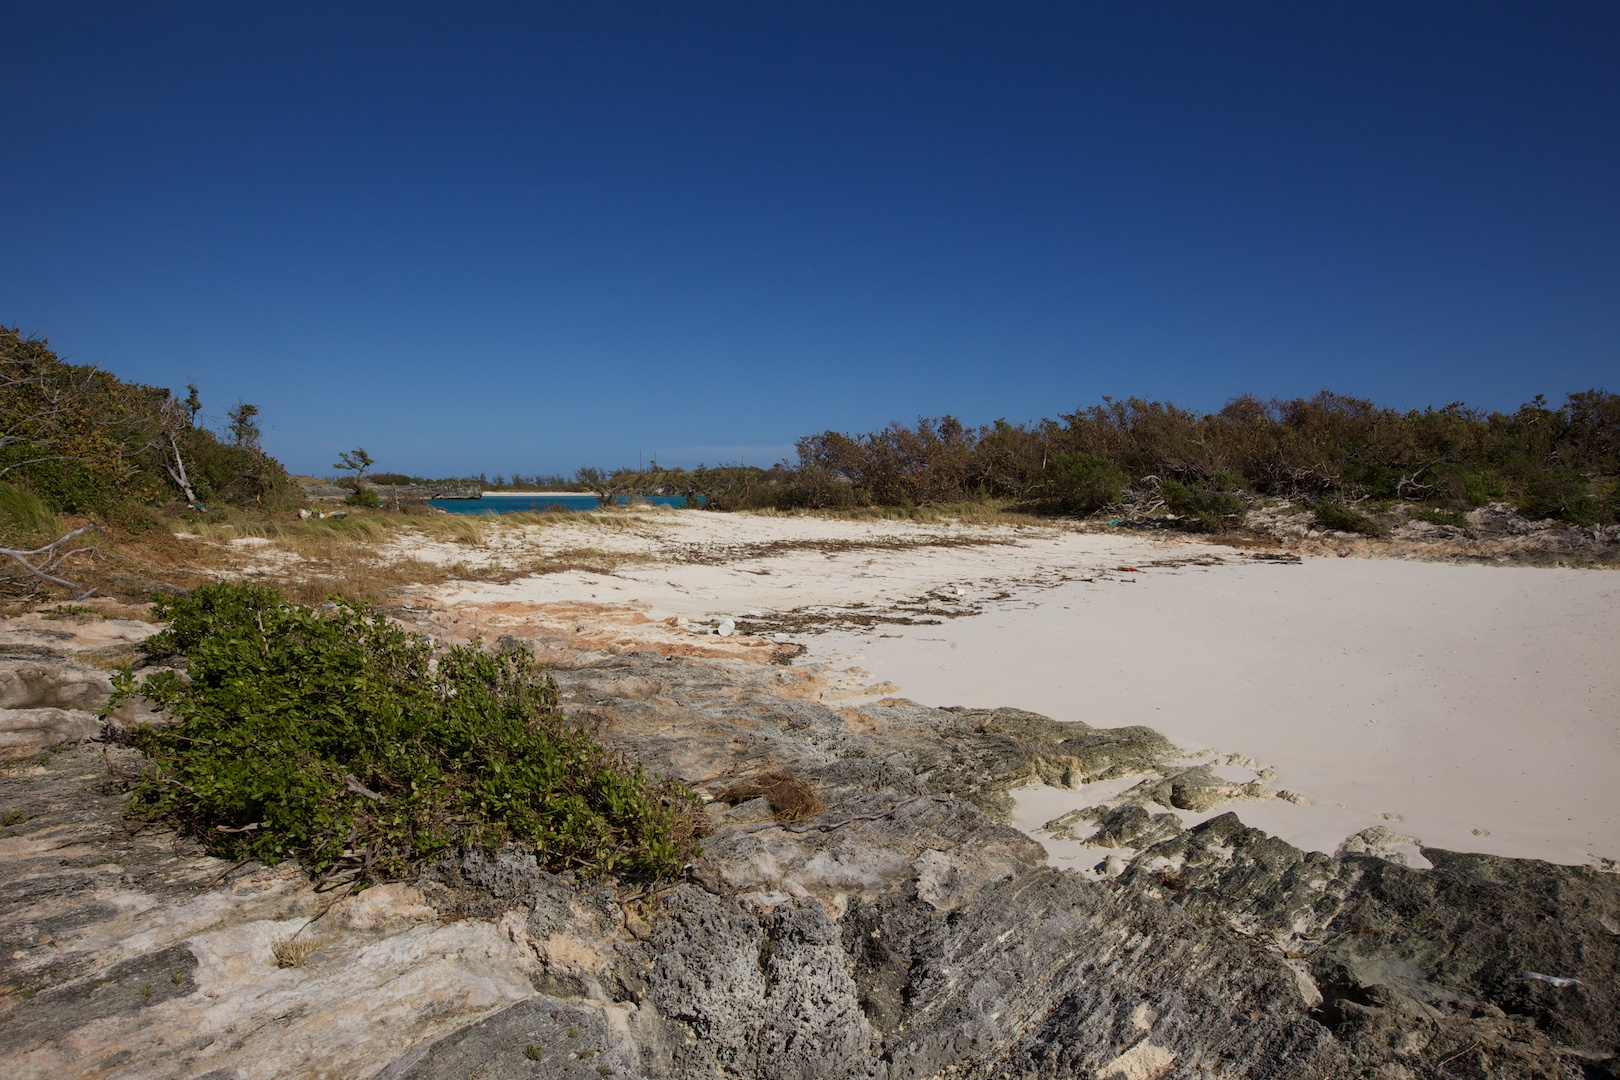  The beach was stripped of vegetation, though this may have protected the dunes that were wiped out in Fabian 